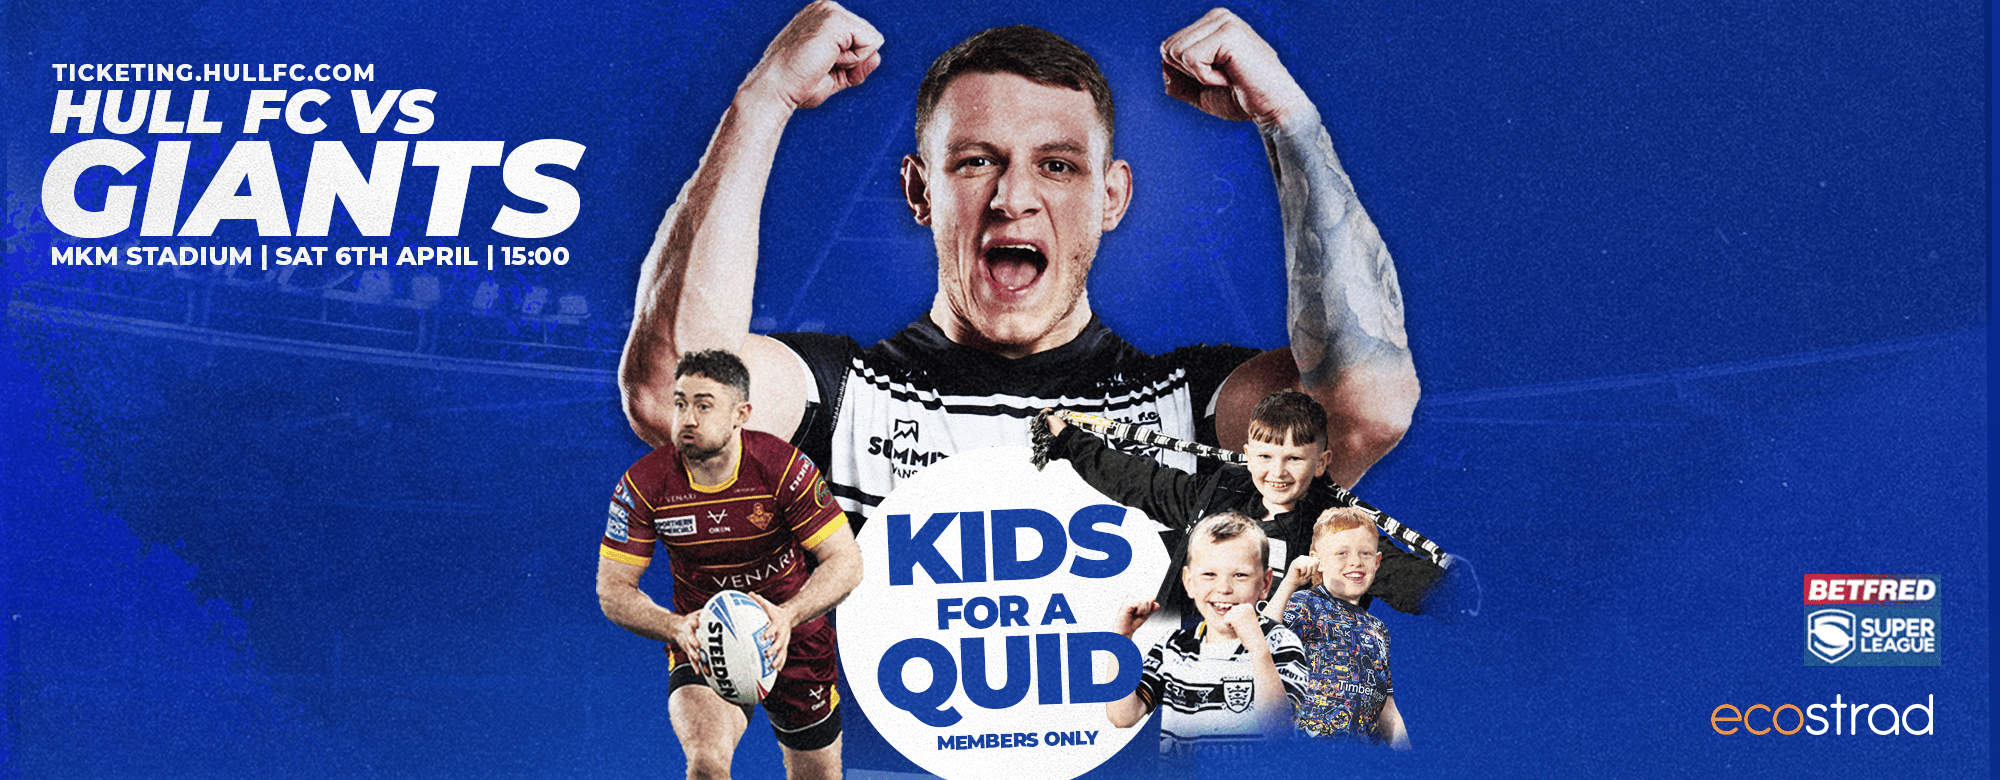 ‘Kids For A Quid’ Ticket Offer At Giants Clash